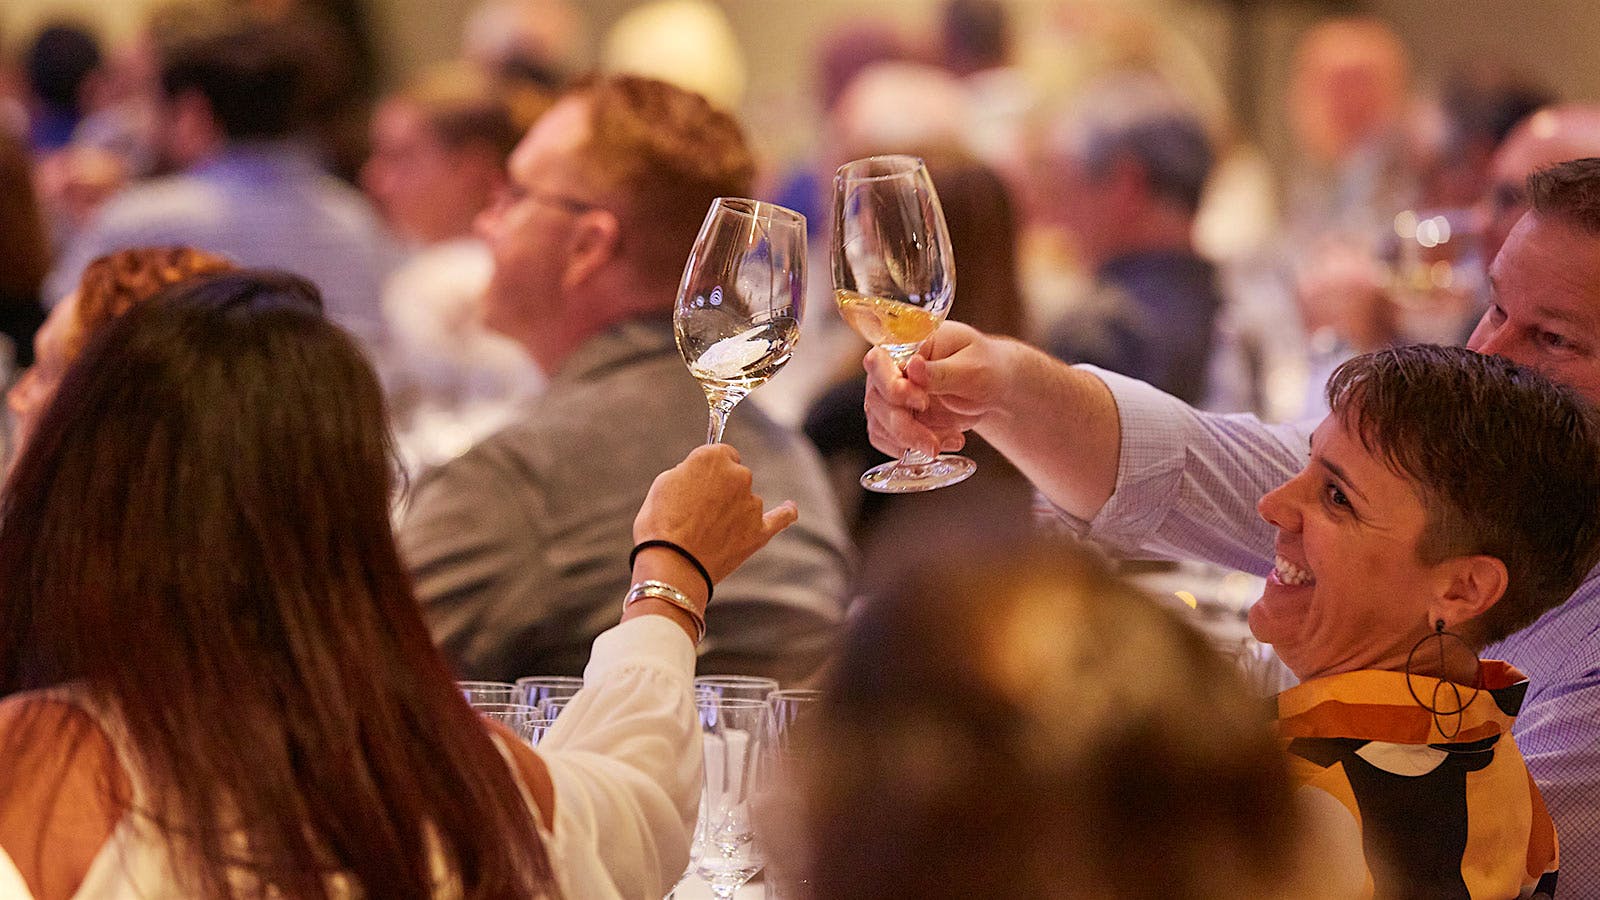 The New York Wine Experience: Bringing People Back Together